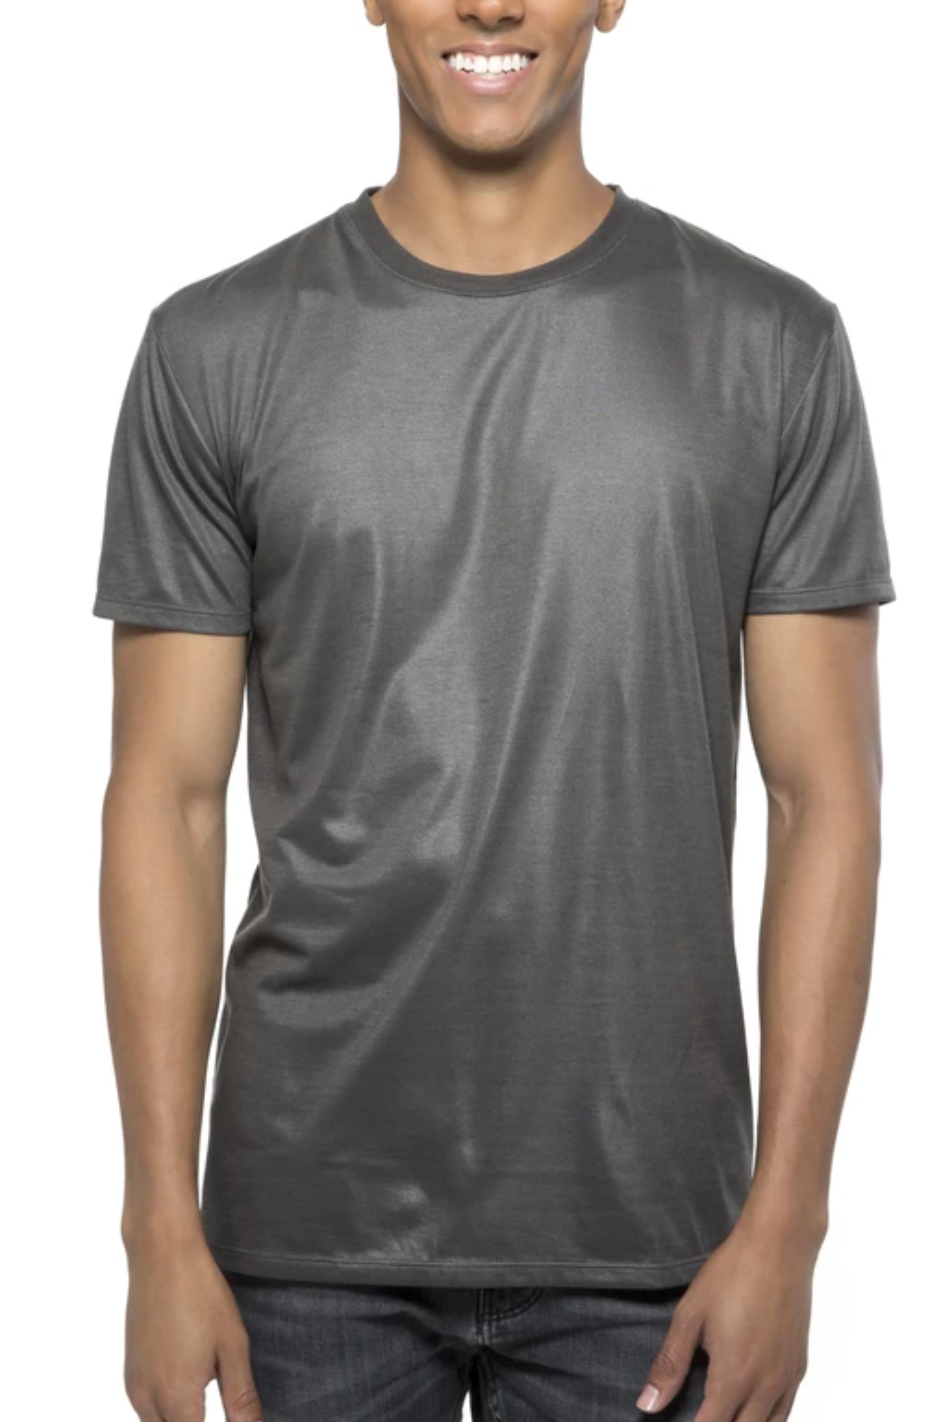 Men's Sublimation Blank, Berlioz Gray, VSC Collection